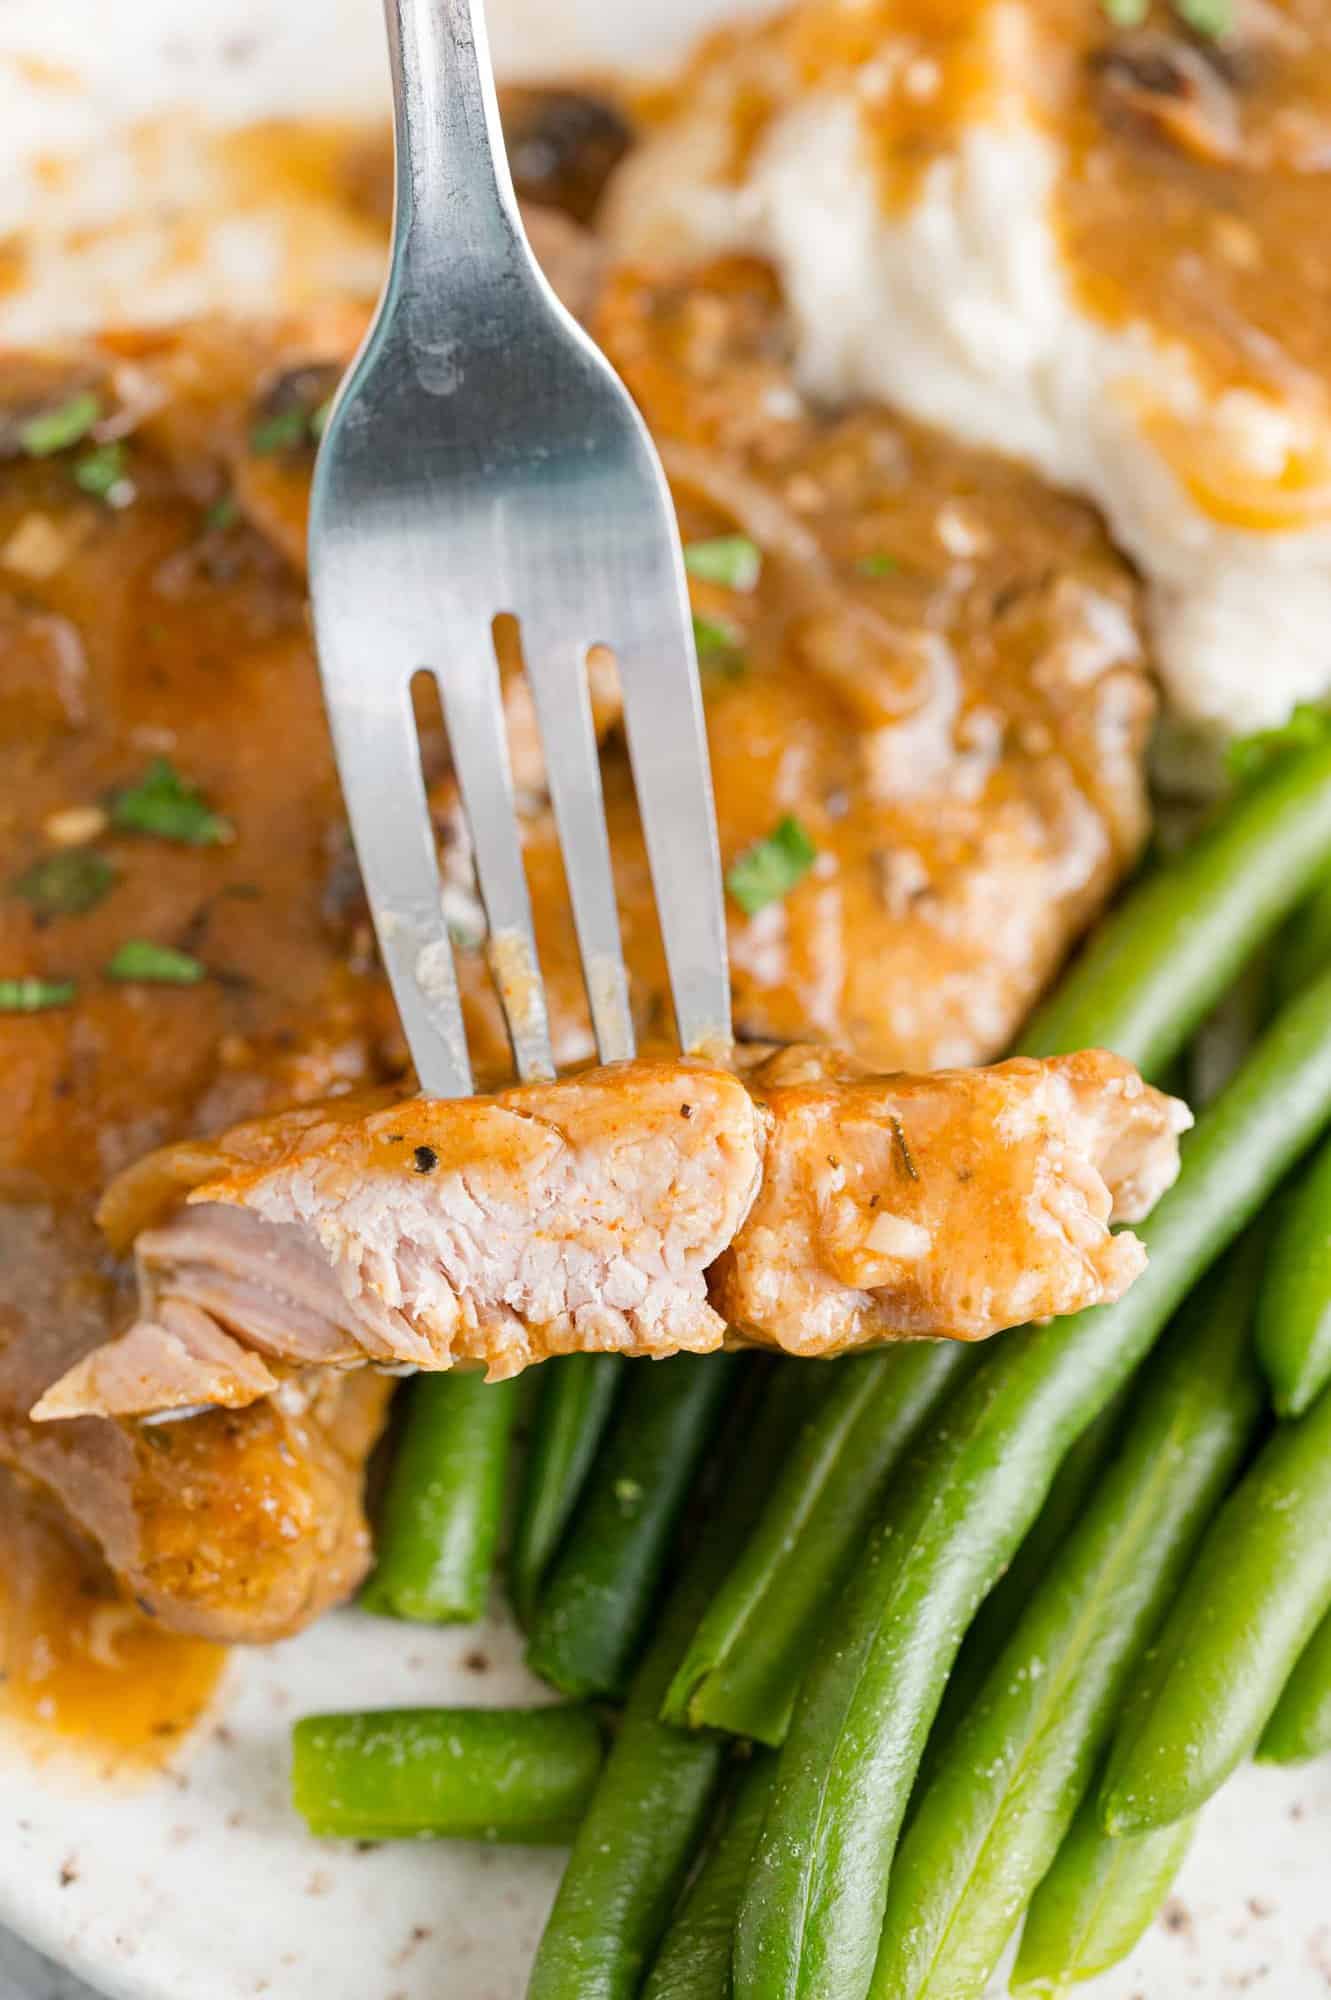 Close up of a piece of pork chop on a fork, held above a plate of pork chops, mashed potatoes, and green beans.